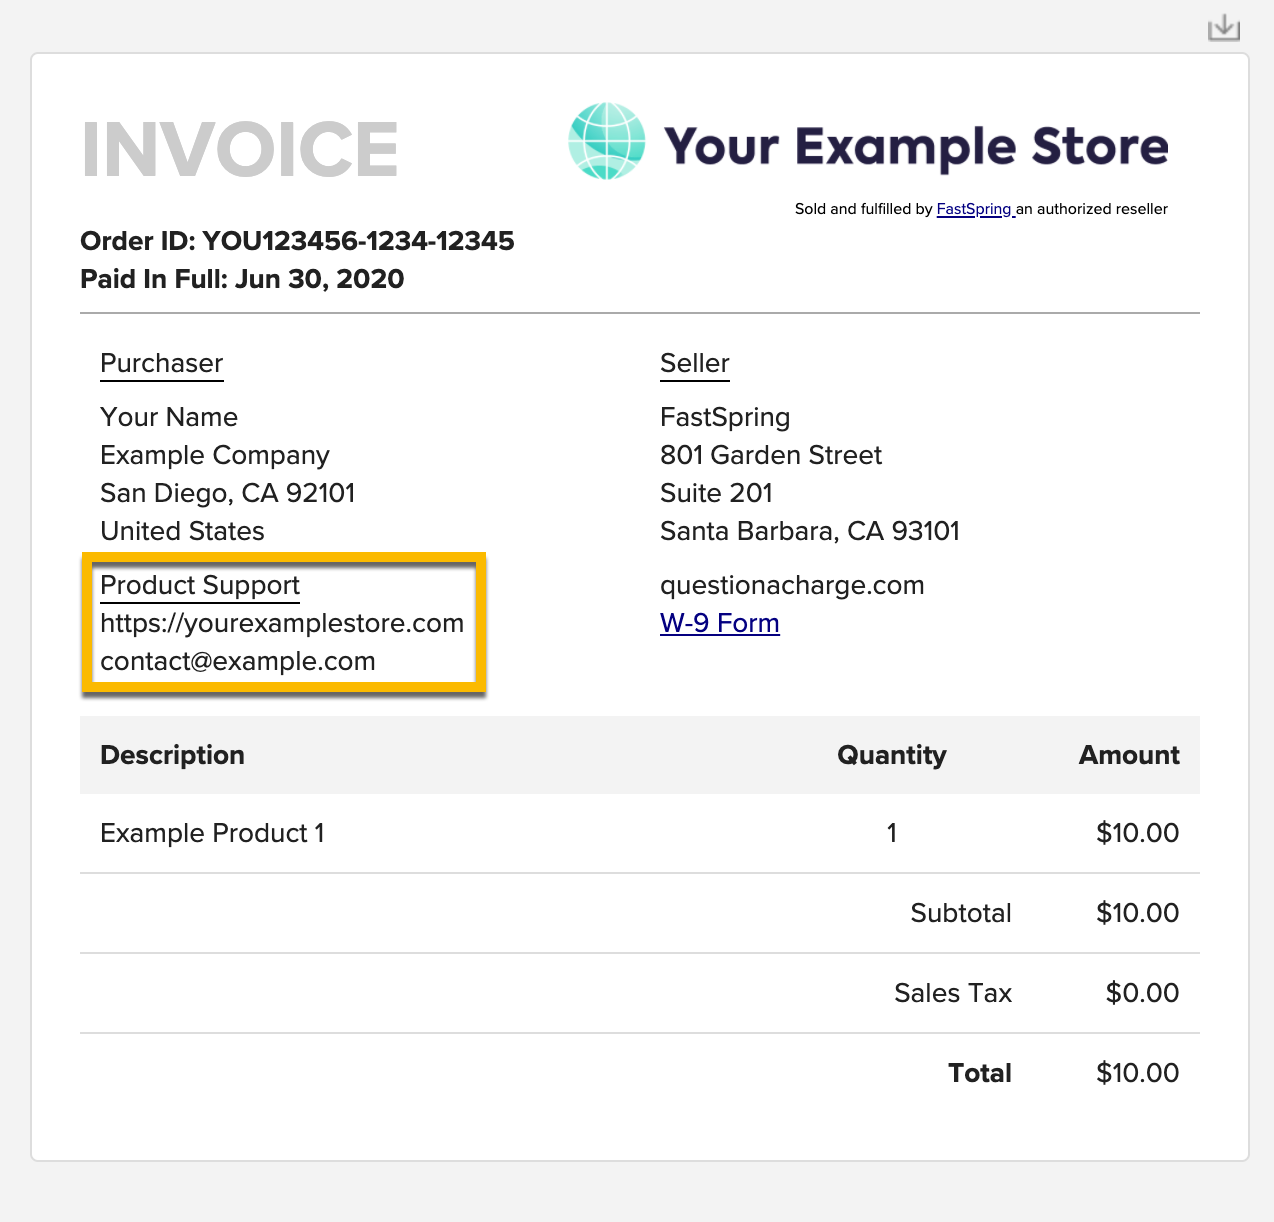 FSPRG-invoice-support.png